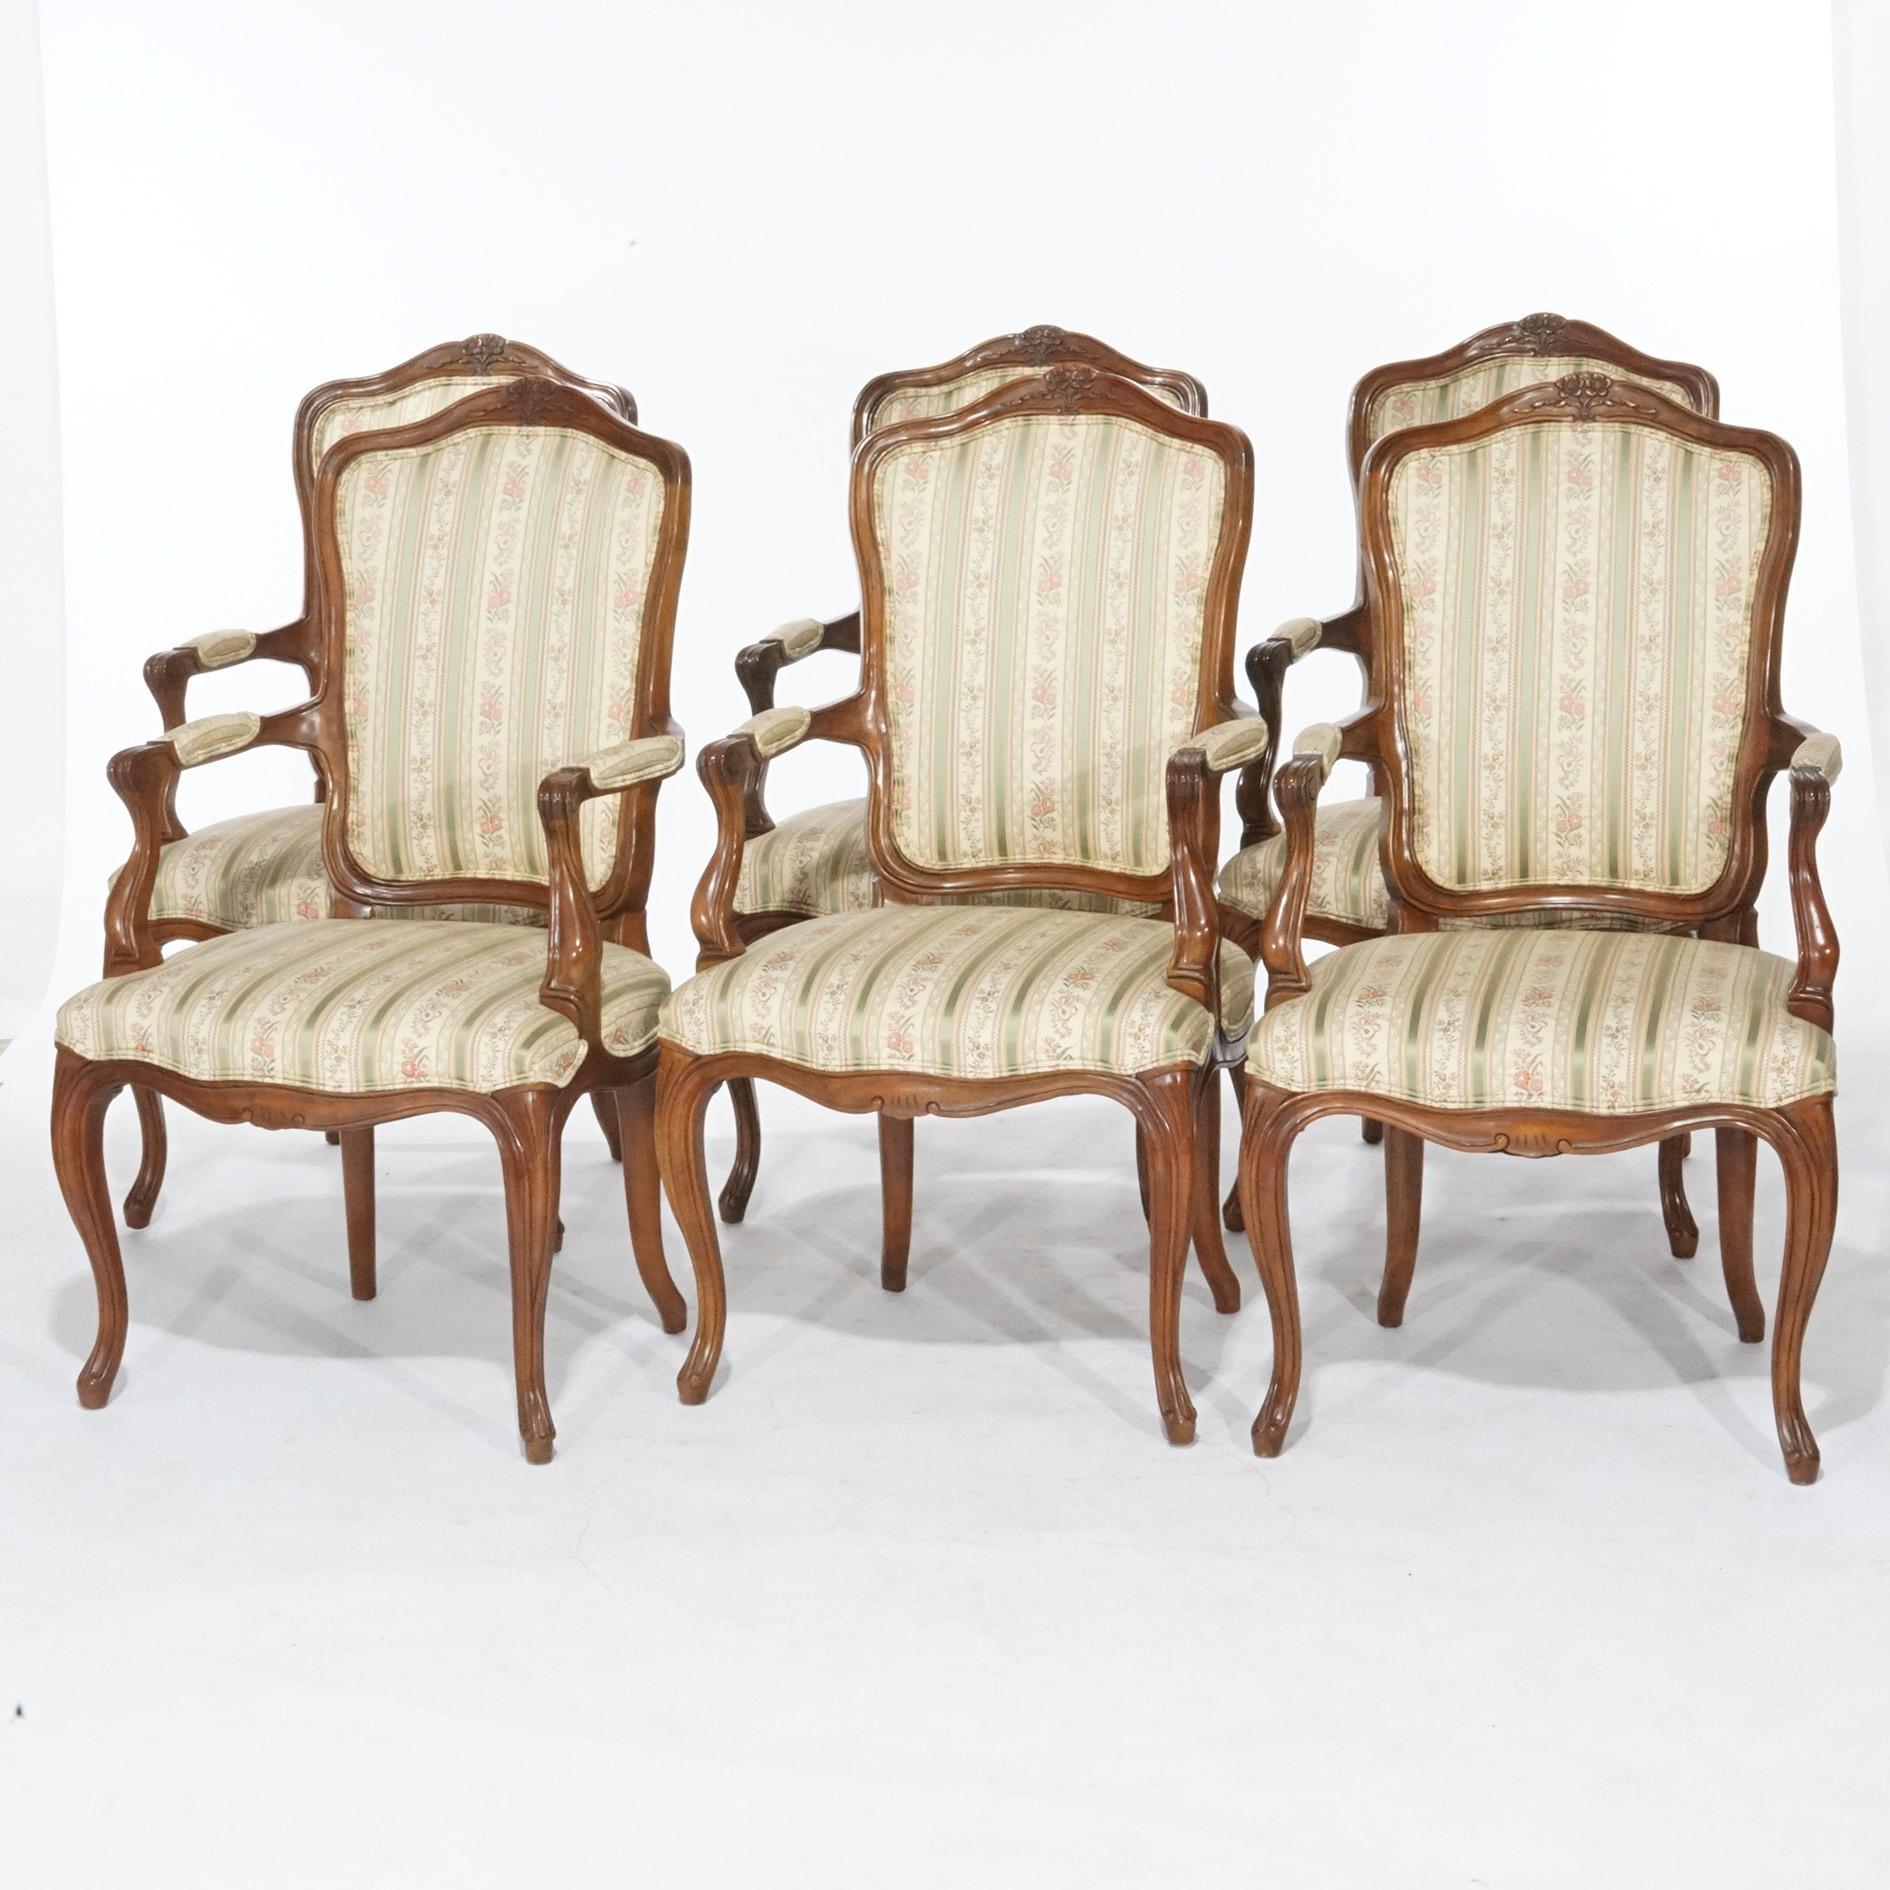 A set of six French Louis XV style armchairs offer upholstered backs and seats with walnut frame having carved crests, scroll form arms, and raised on cabriole legs, maker label as photographed, 20th century.

Measures- 40.25''H x 21.5''W x